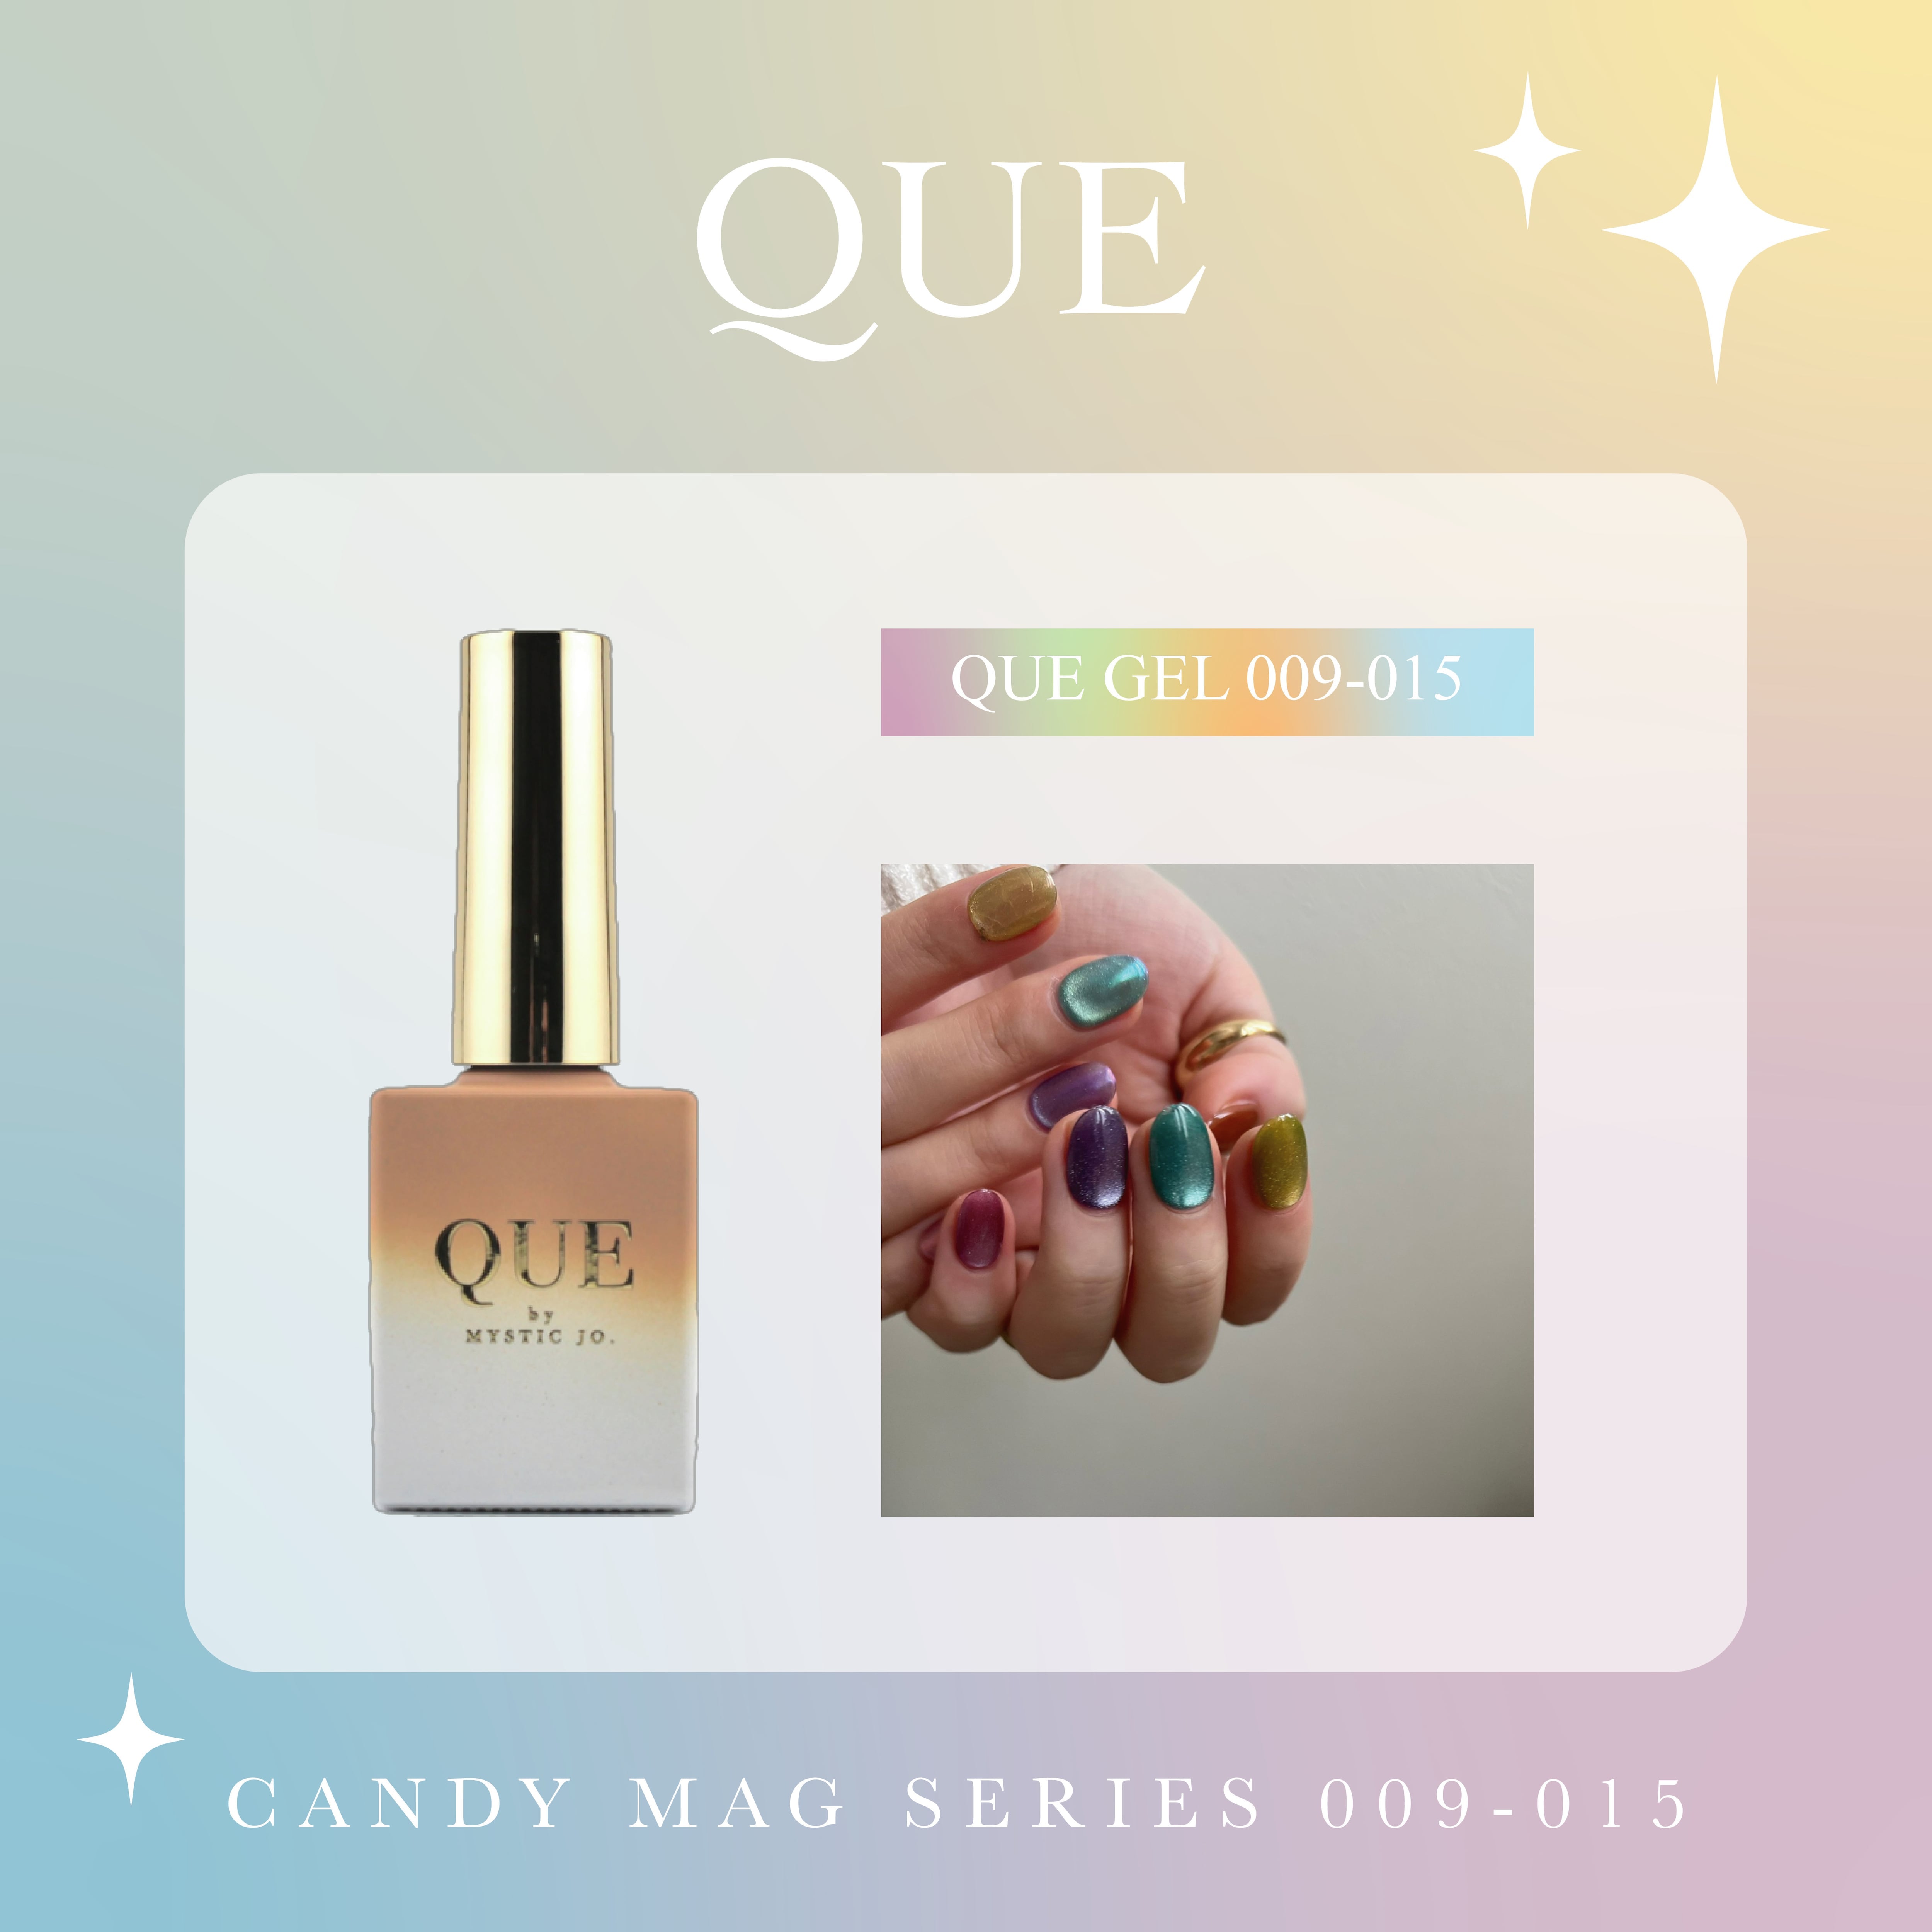 QUE gel by Mystic Jo. - Candy MAG